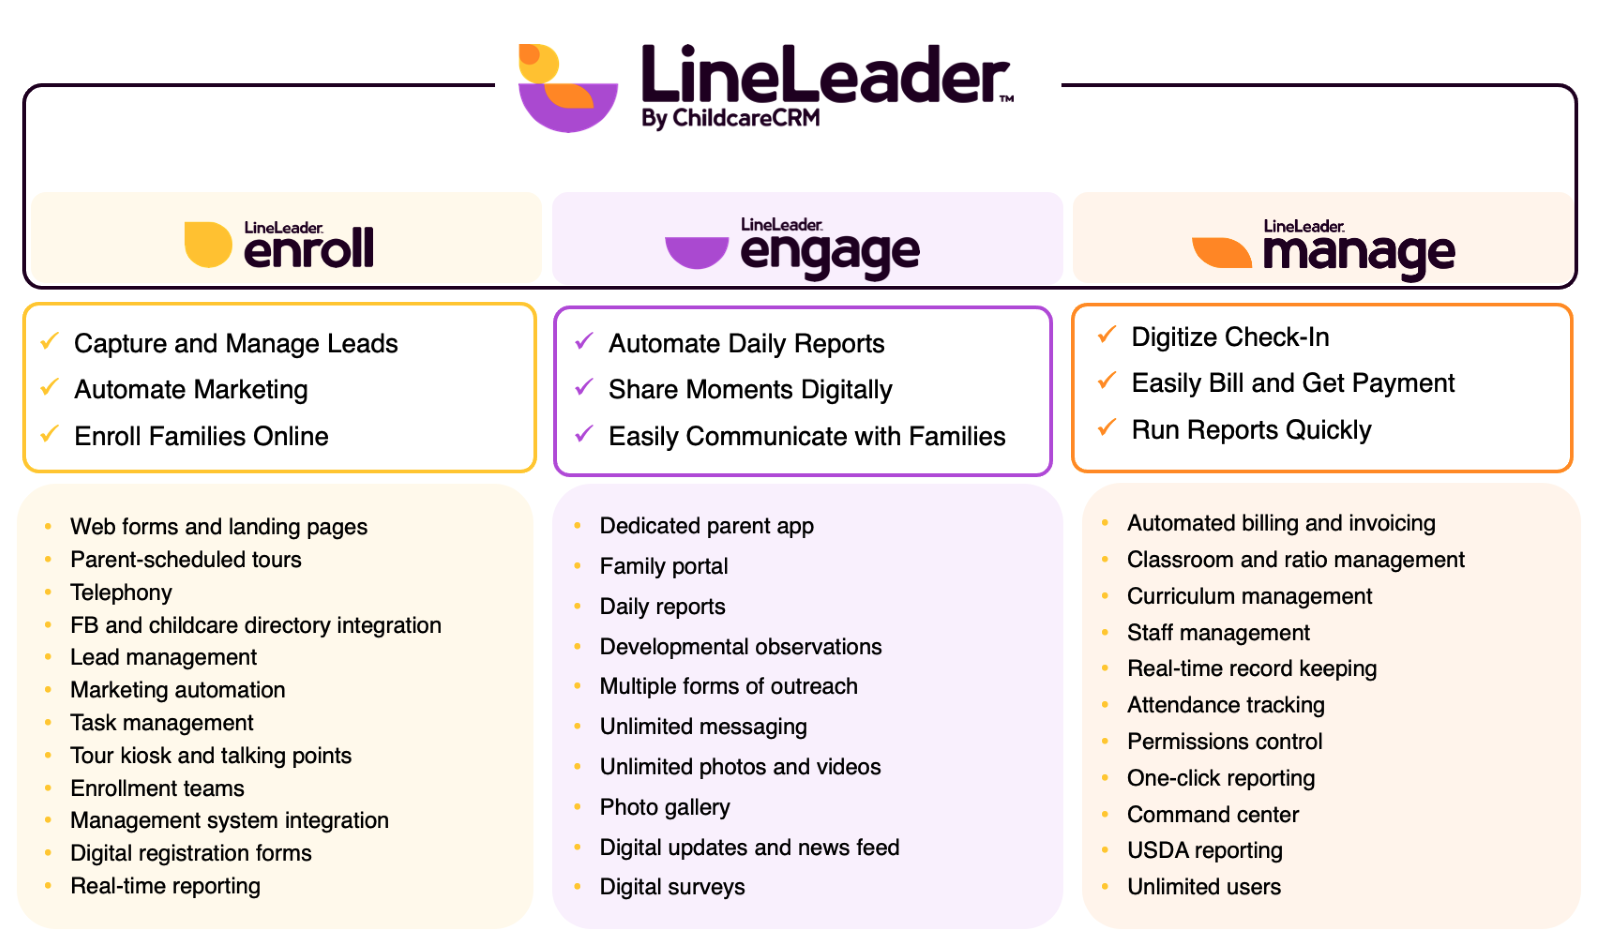 3 modules of LineLeader: enroll, engage, manage